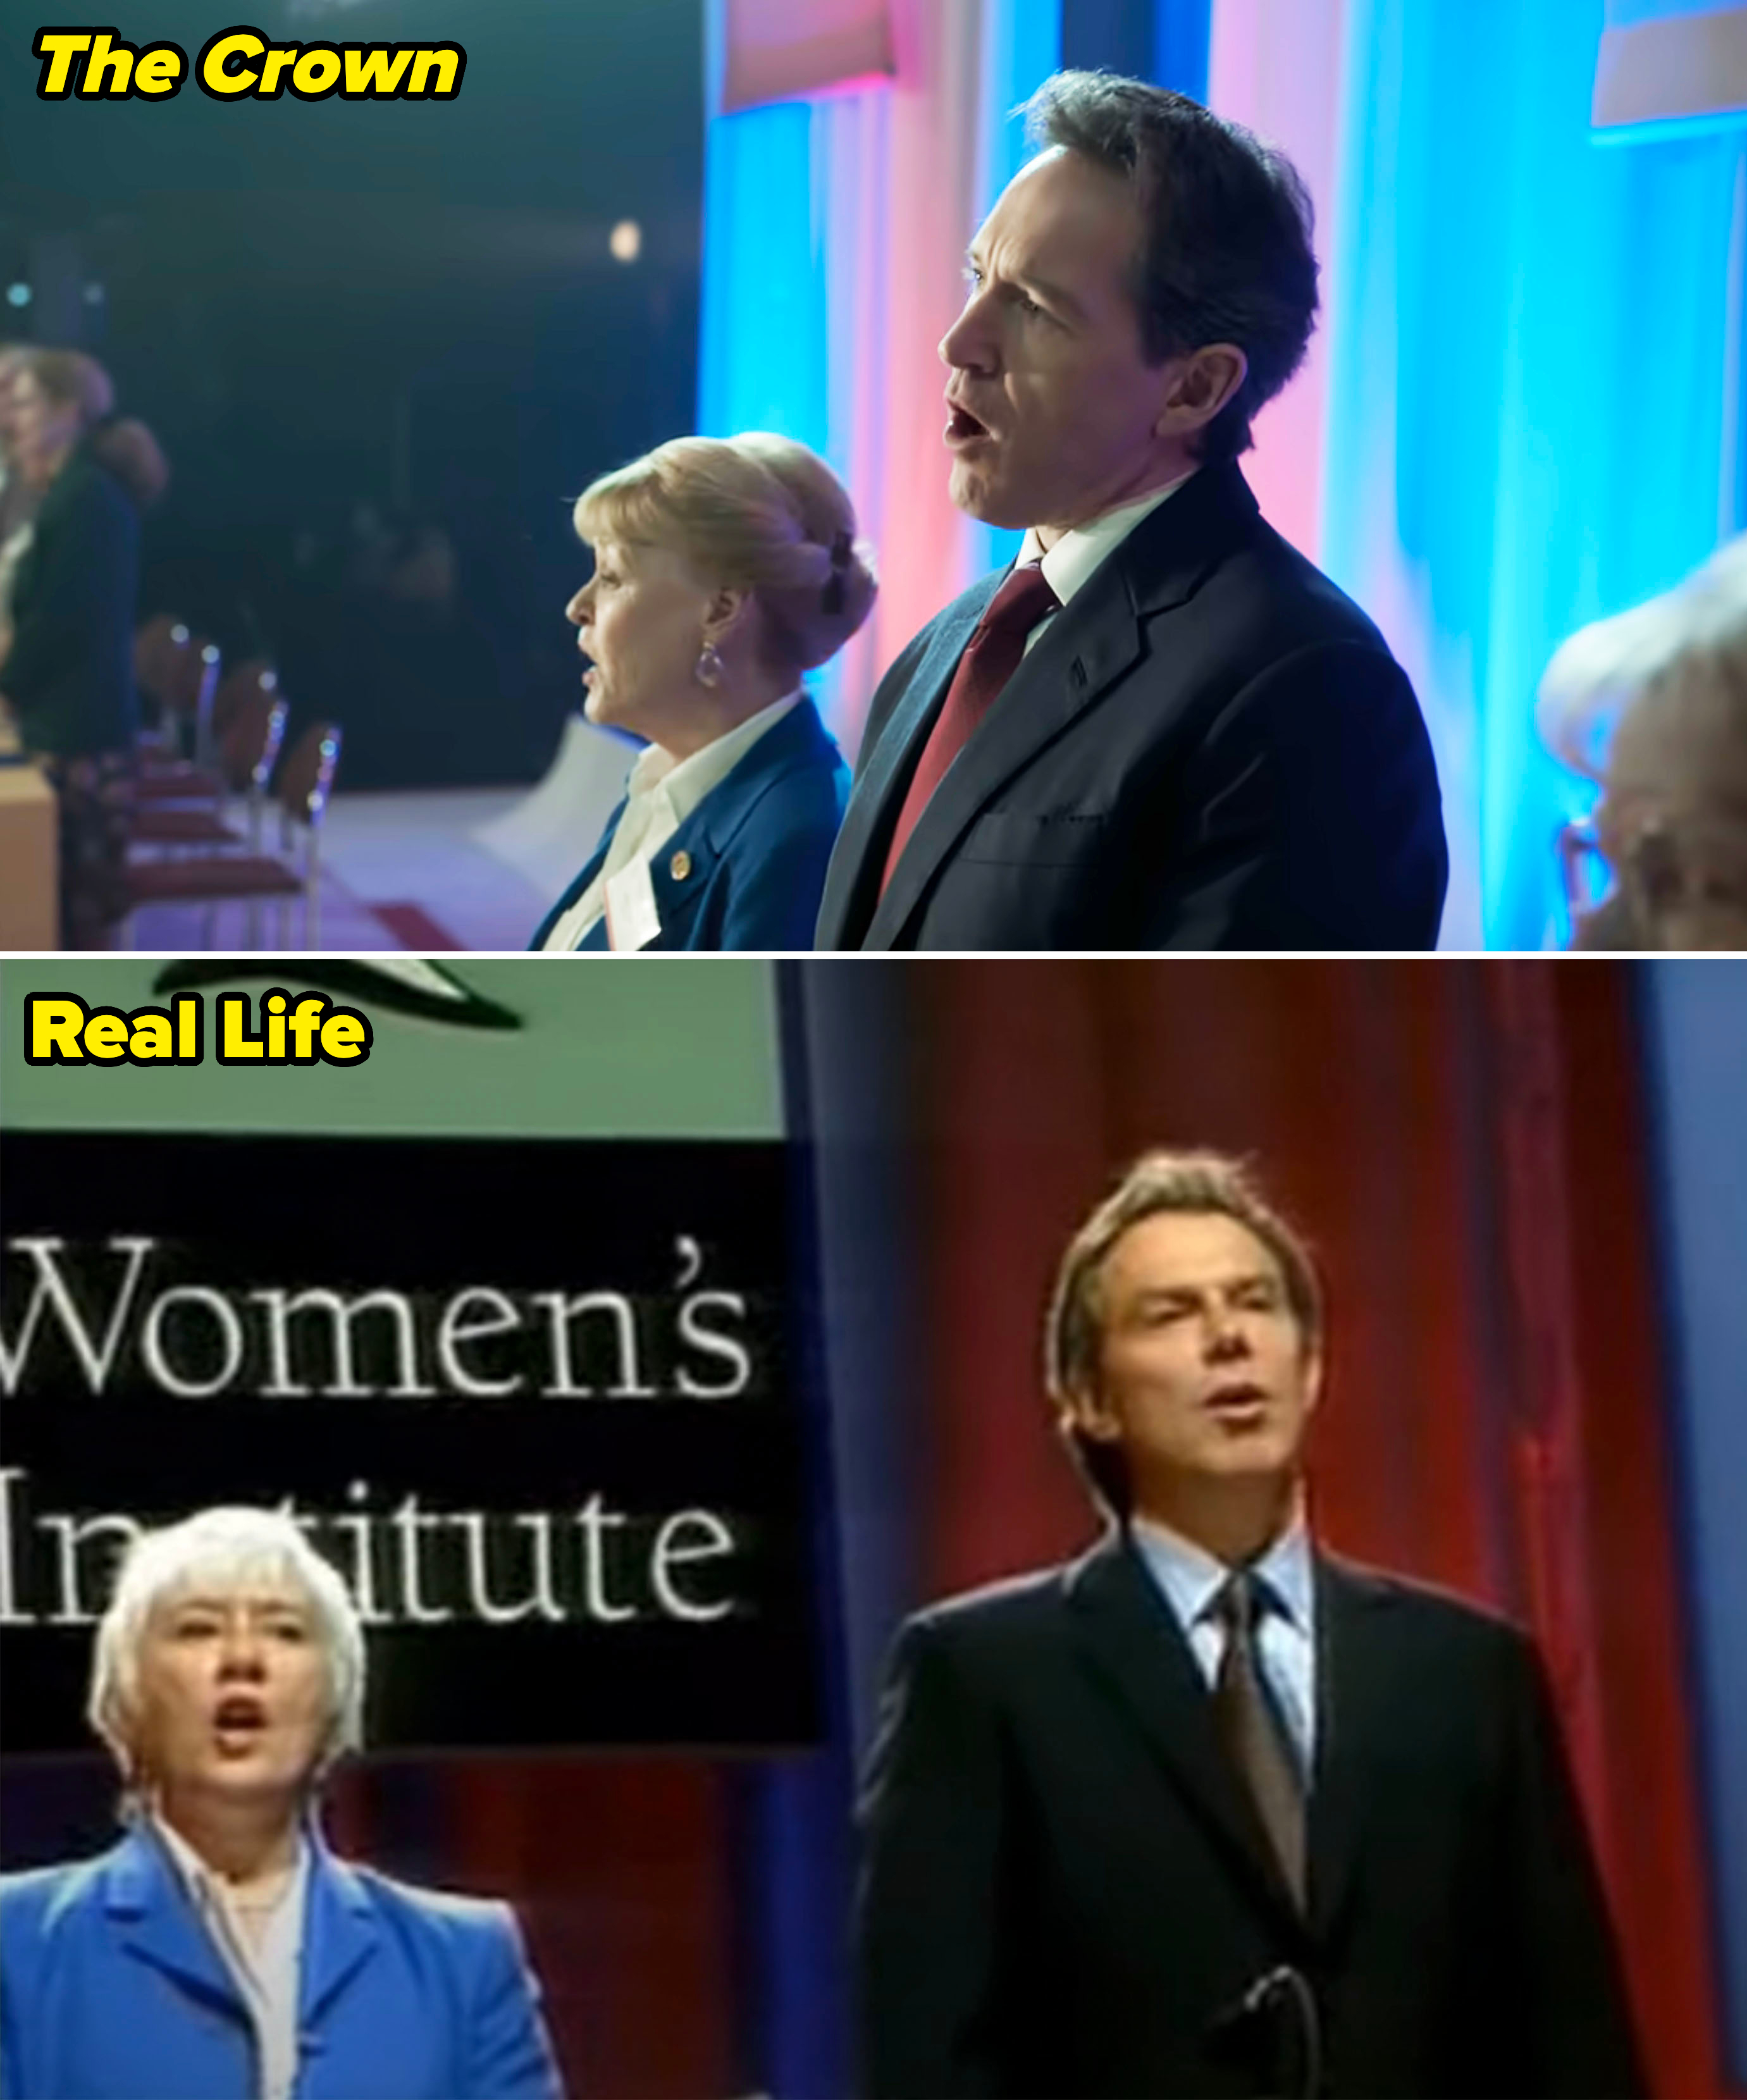 Side-by-sides of real life vs. &quot;The Crown&quot; of Tony Blair giving a talk